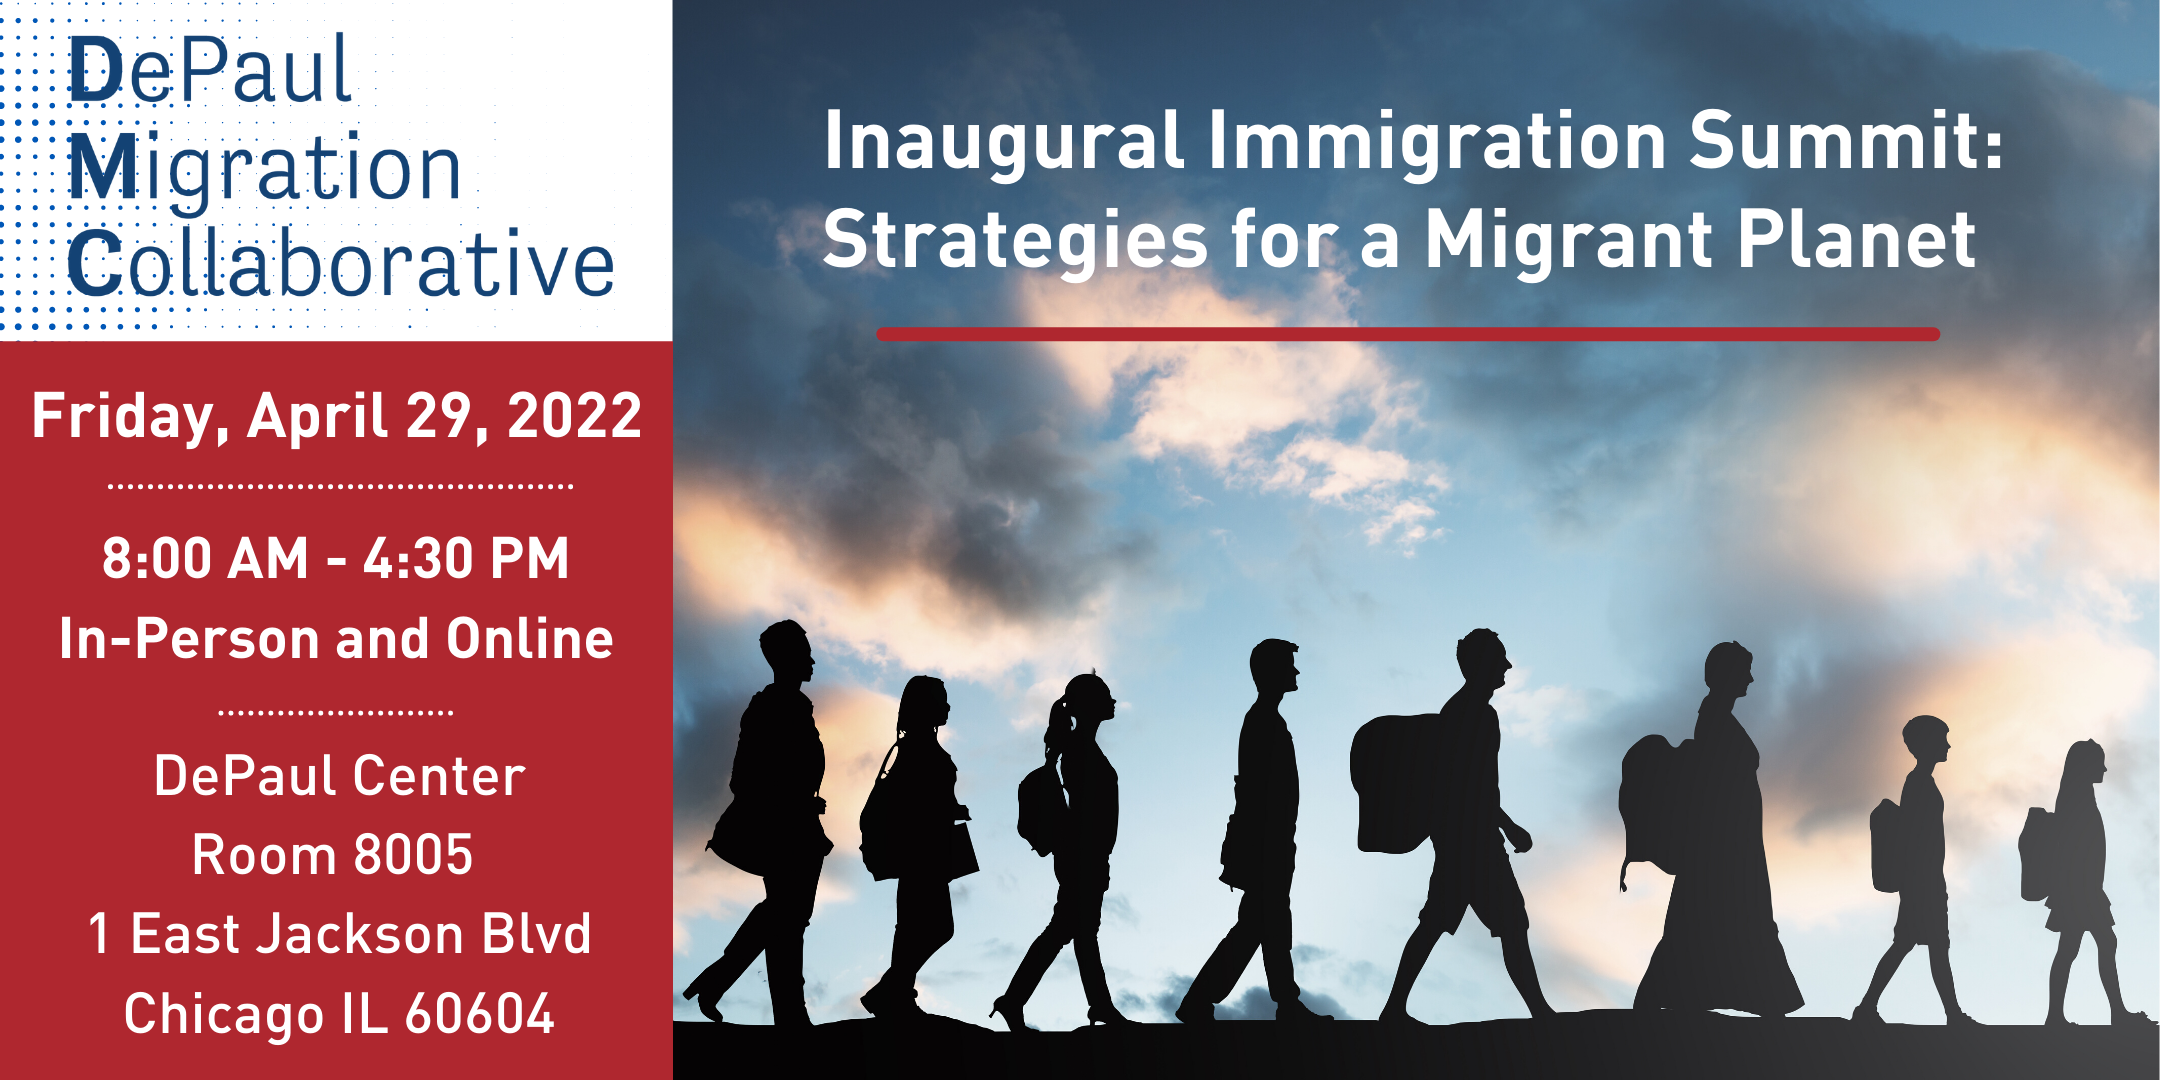 Events News DePaul Migration Collaborative Centers, Institutes